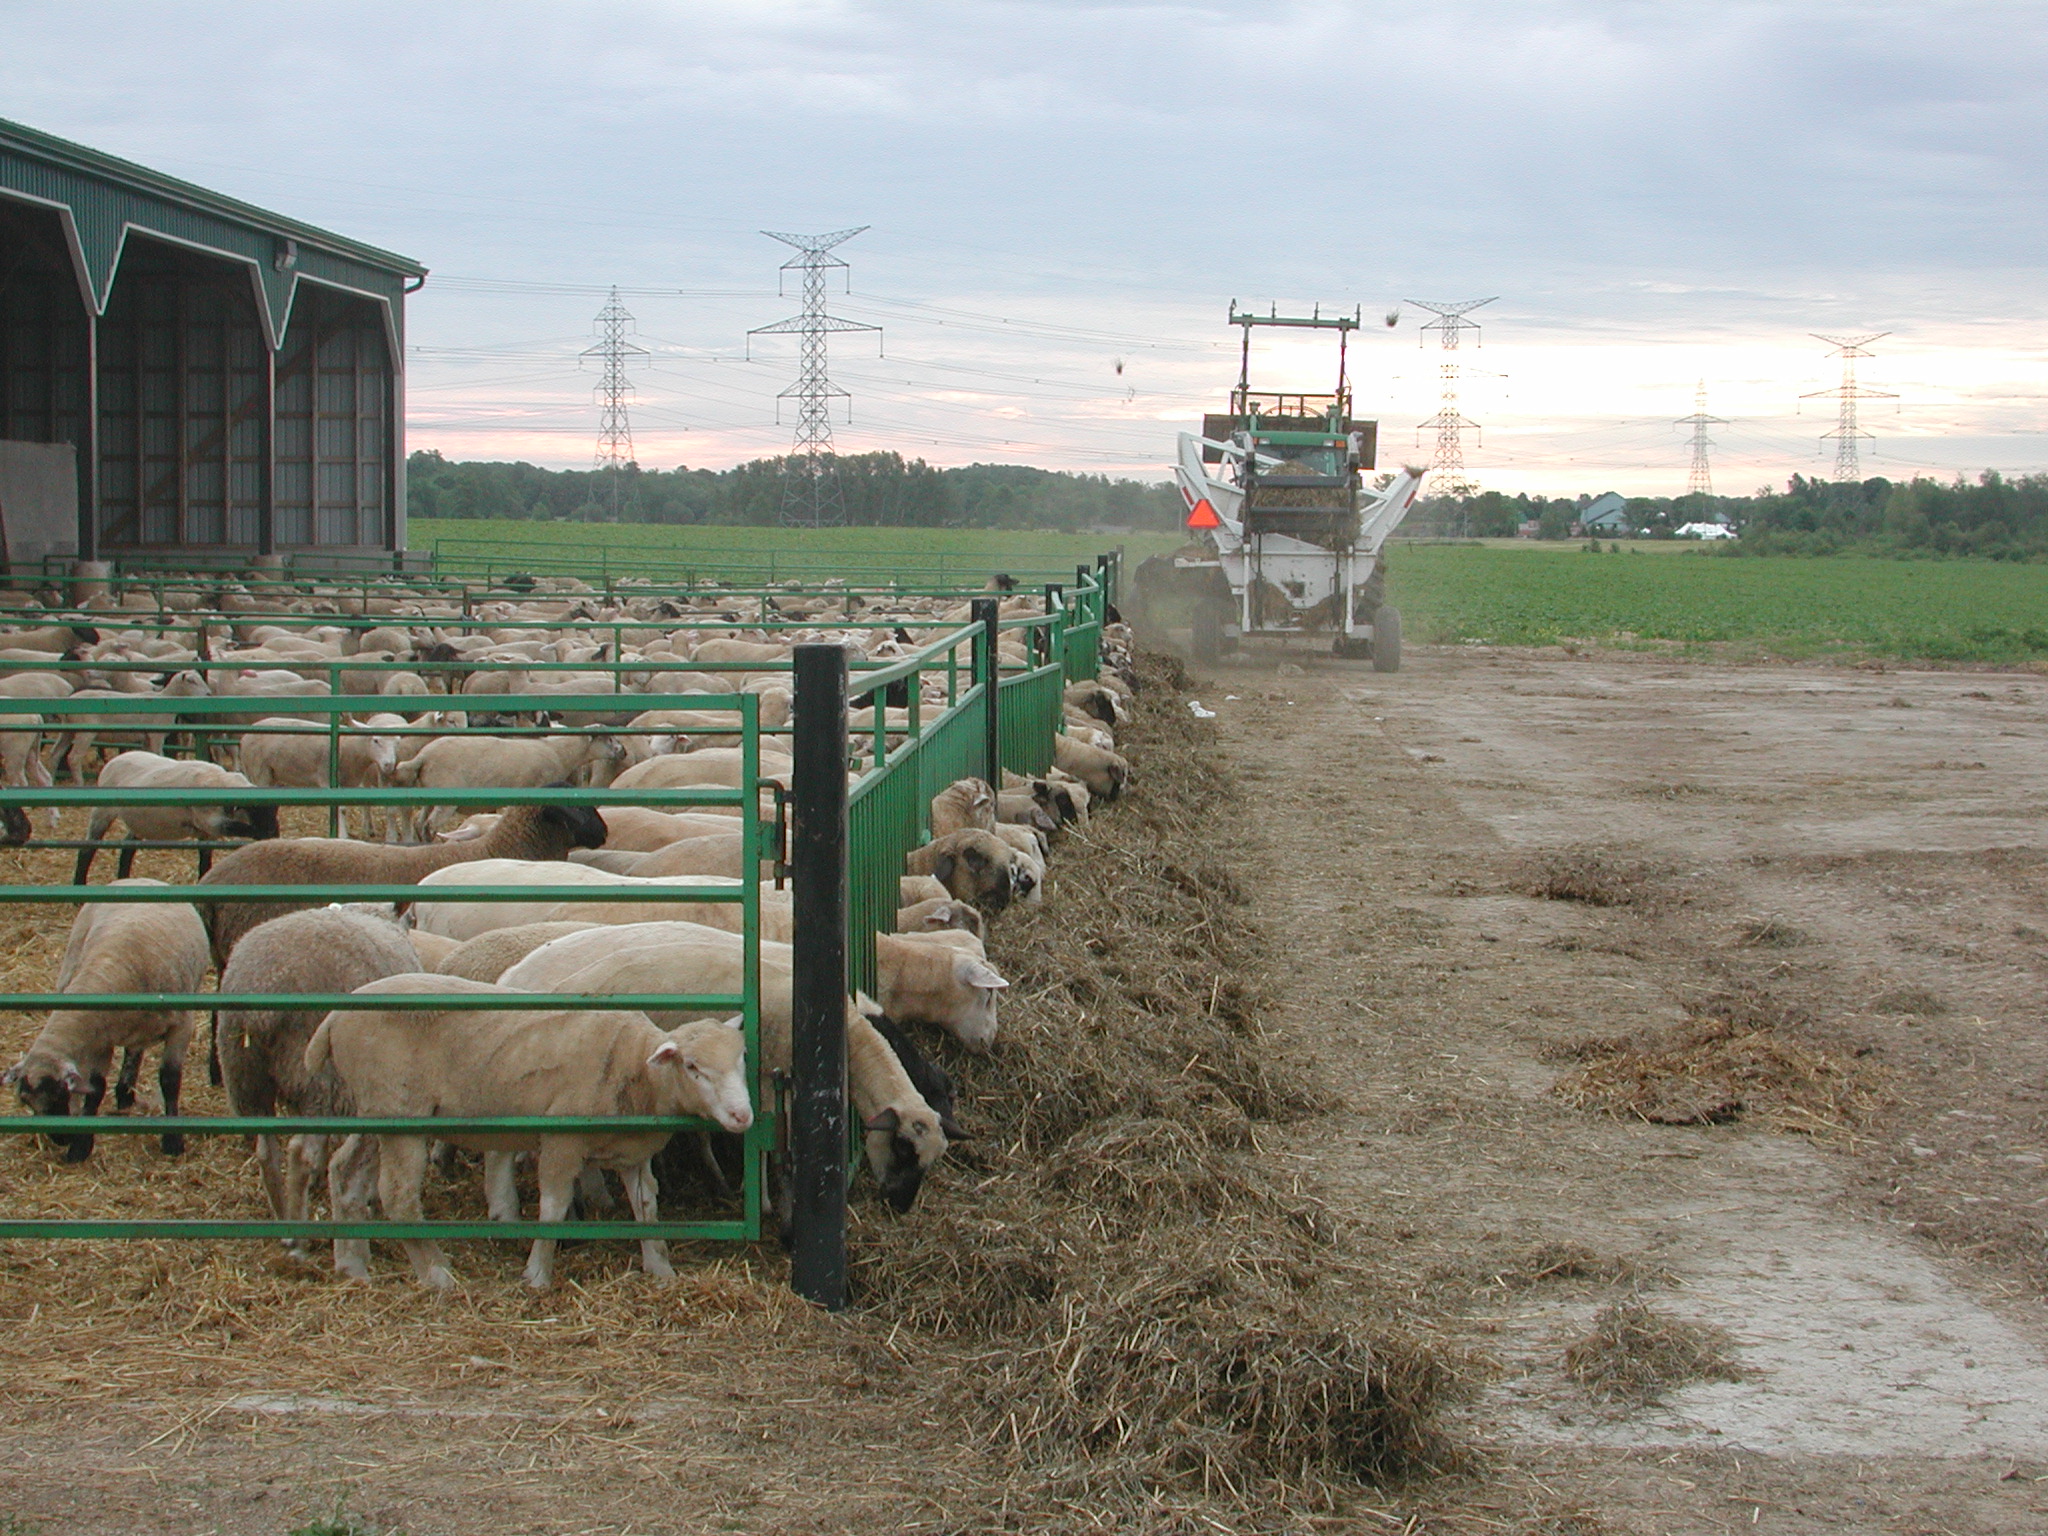 Picture showing lambs in an open air feedlot. The feedlot yard is fenced with bunker feeding at the front.